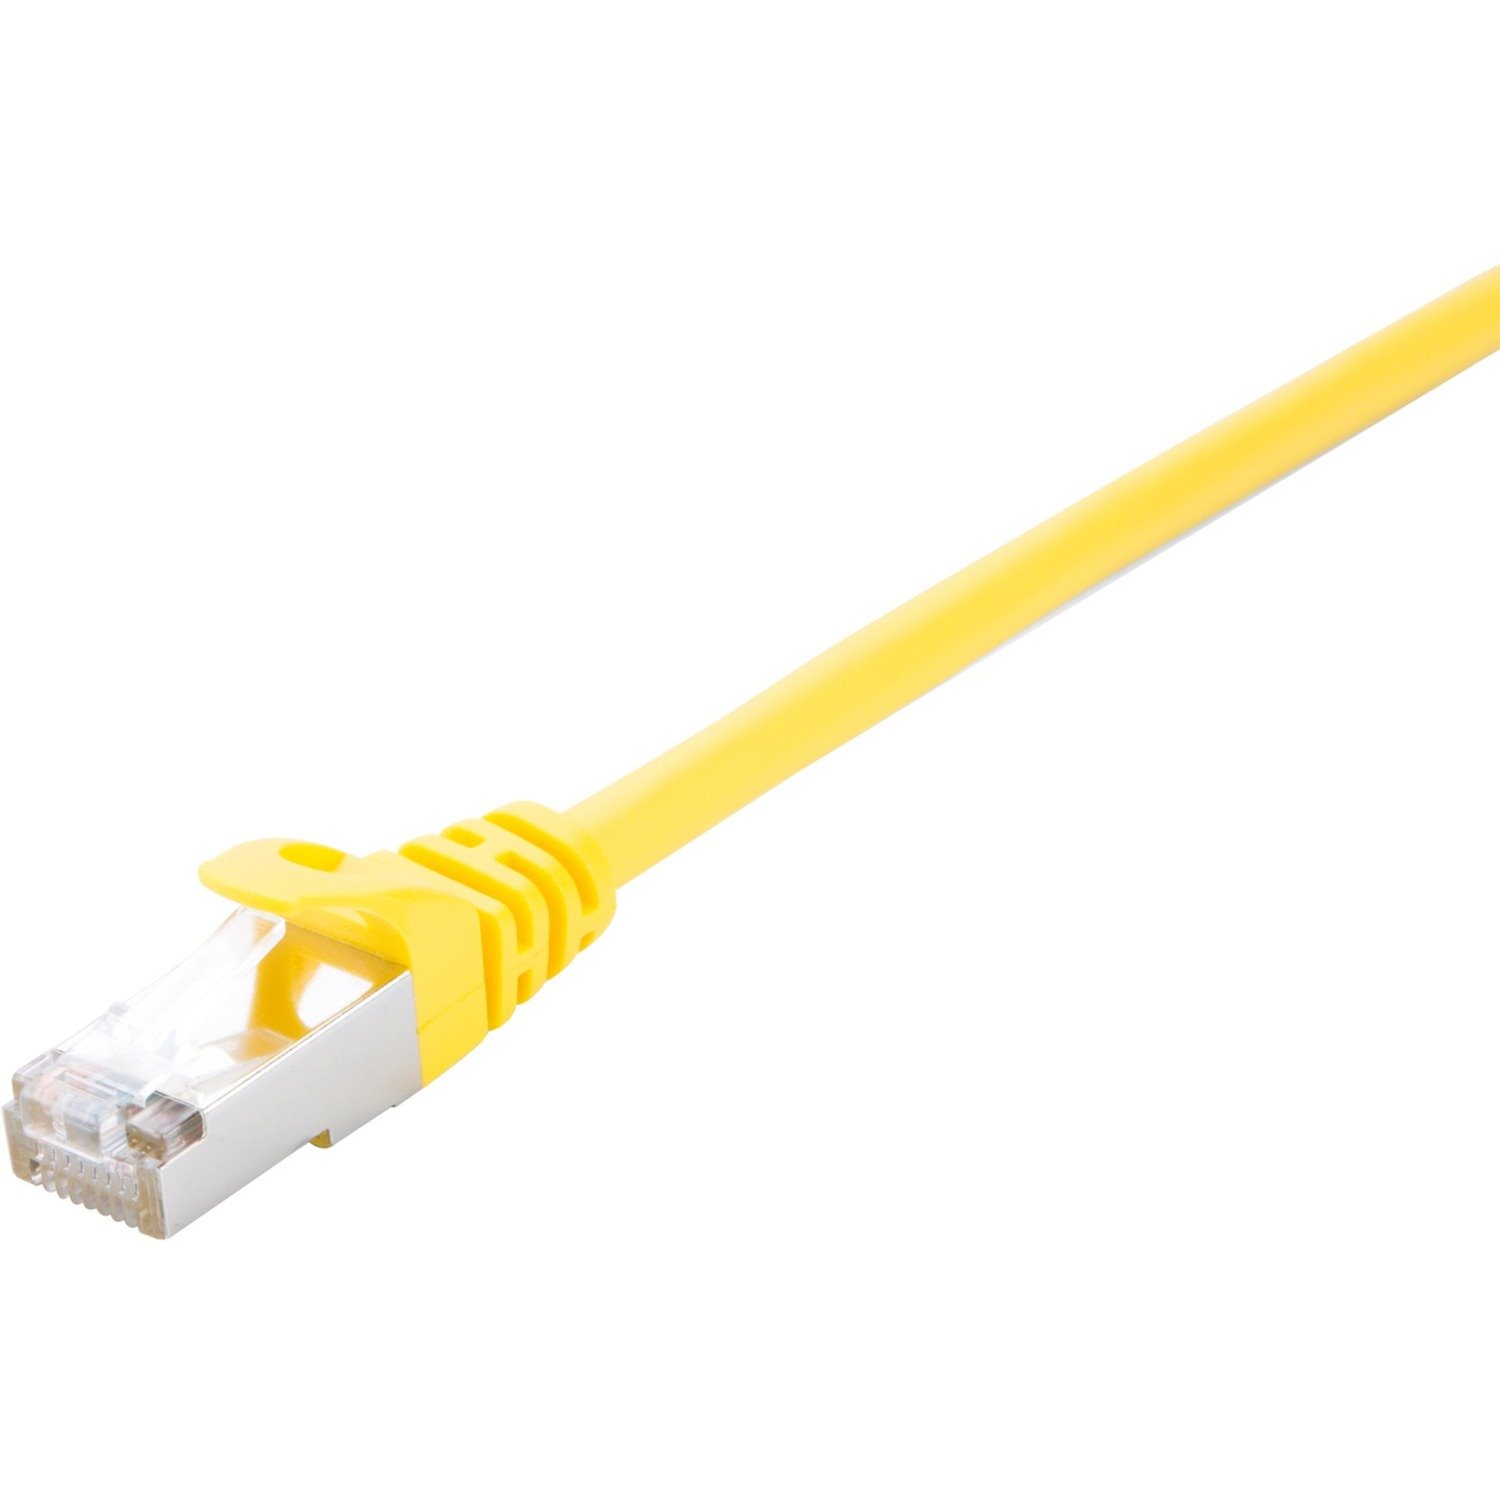 V7 V7CAT6STP-03M-YLW-1E 3 m Category 6 Network Cable for Modem, Patch Panel, Network Card